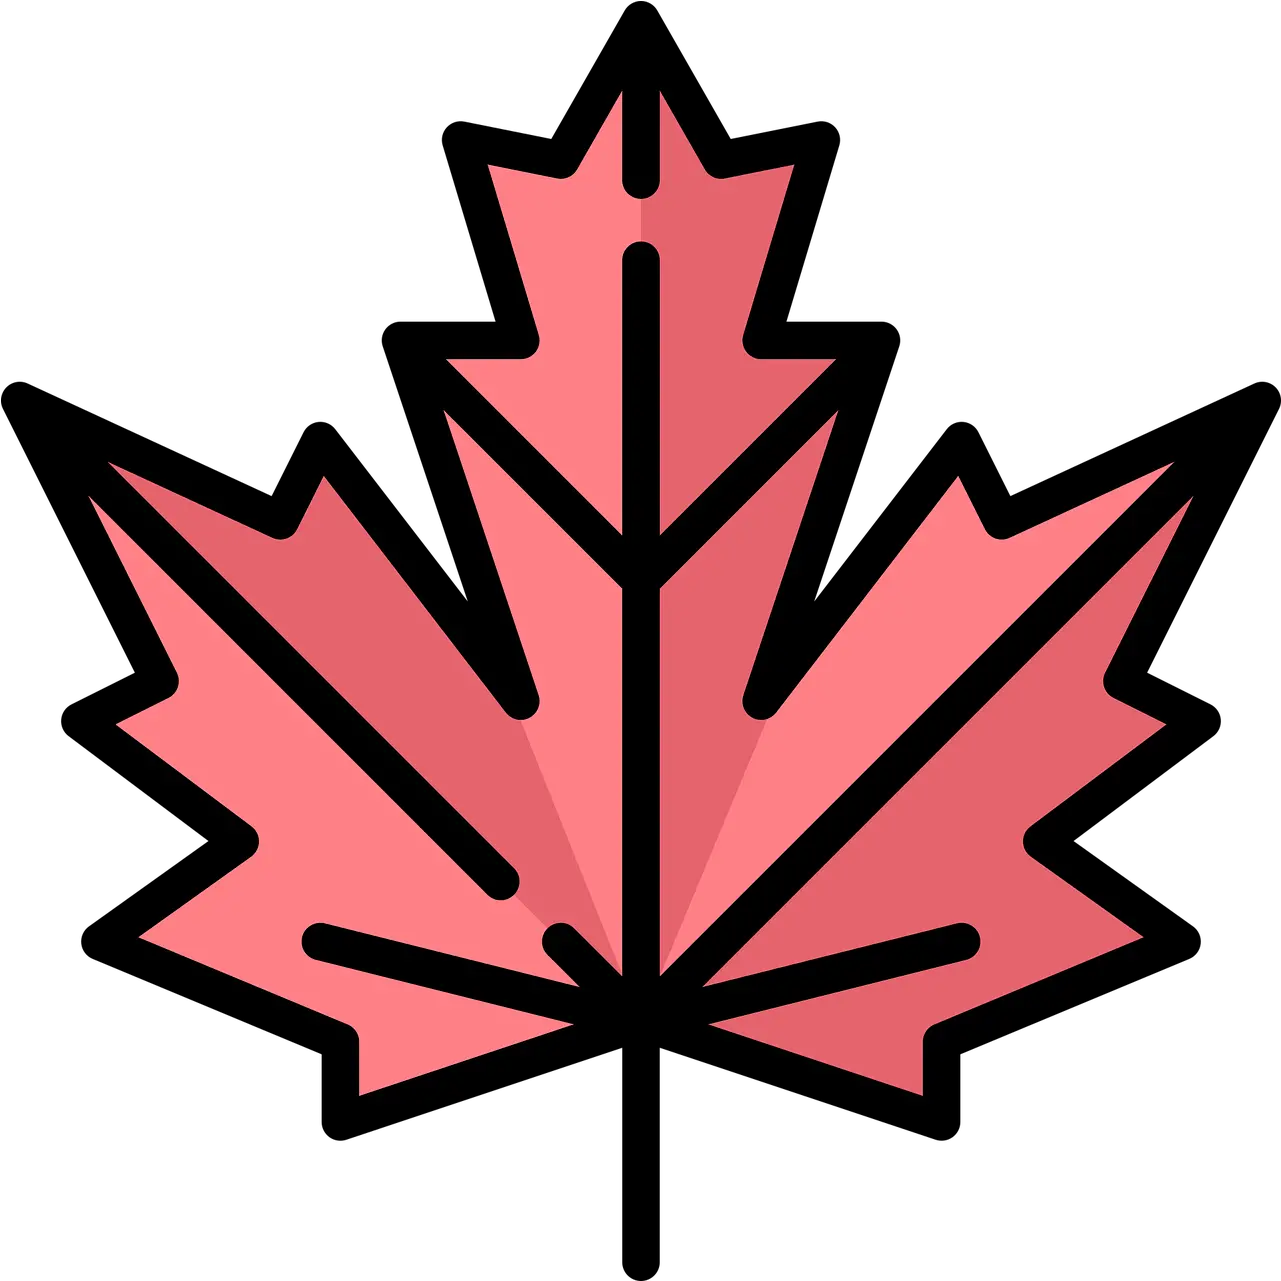 Leaf Canada Maple Free Vector Graphic On Pixabay Png Canadian Leaf Png